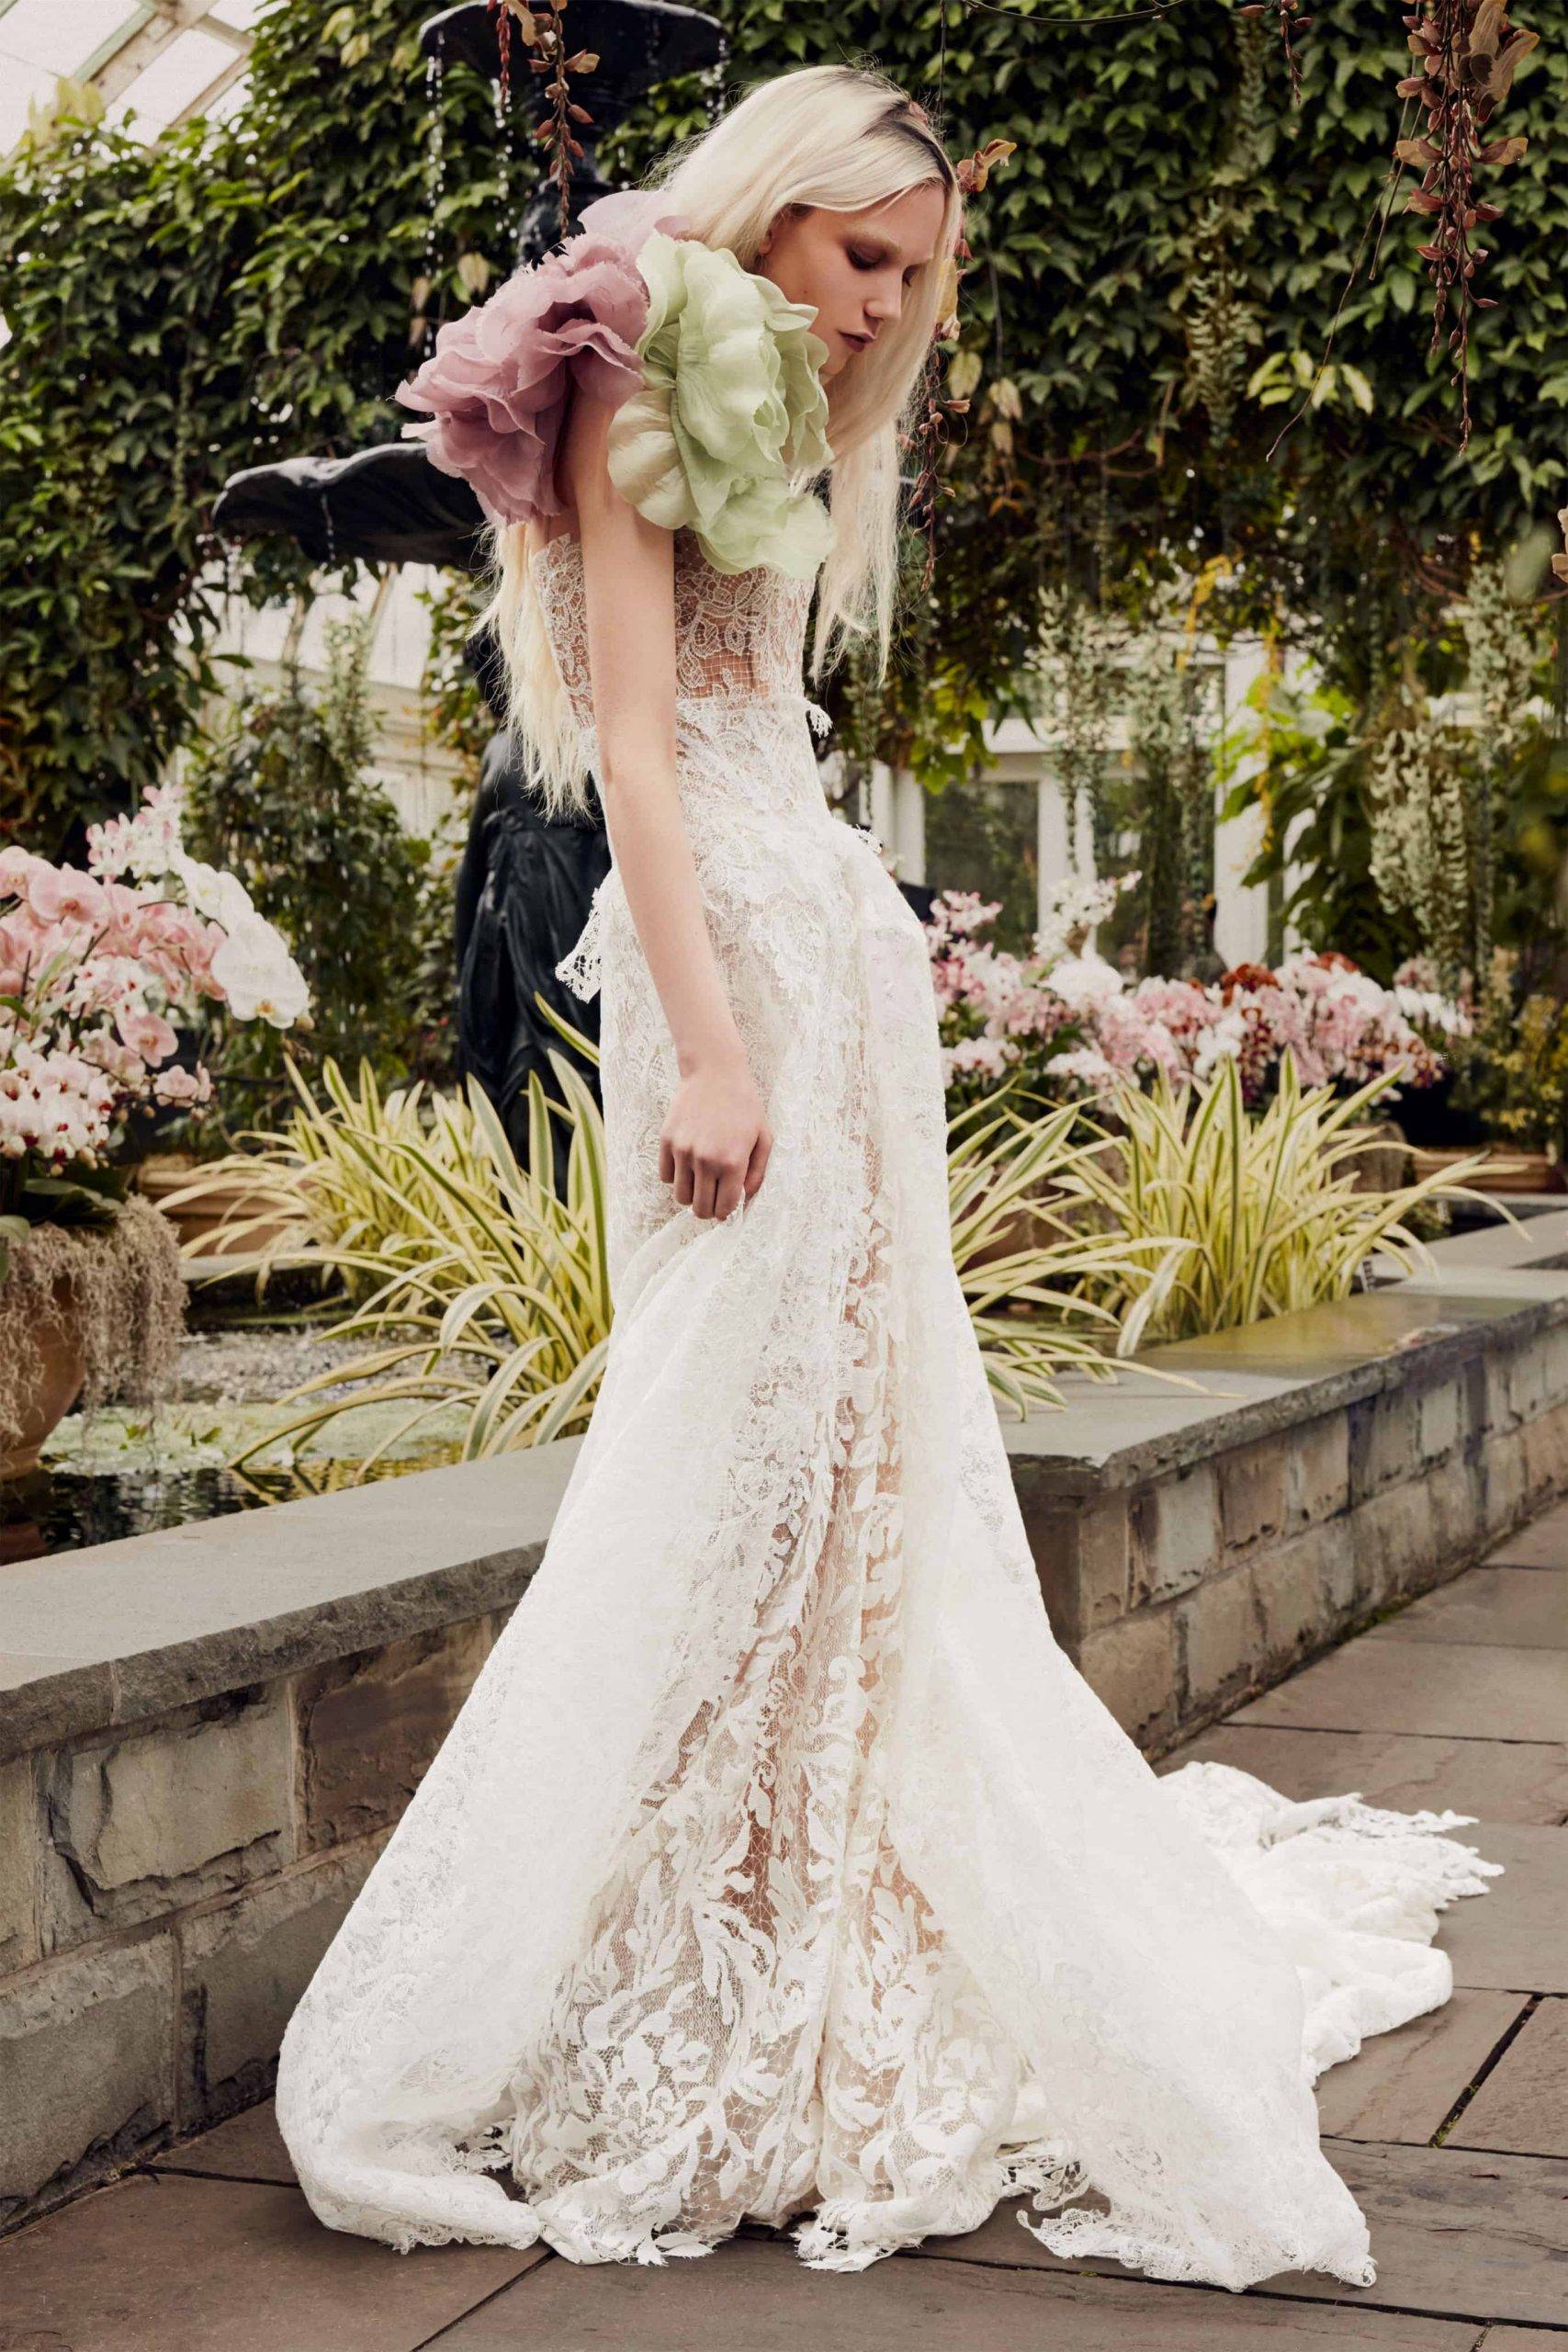 5 Reasons to Go for That Luxury Wedding Dress